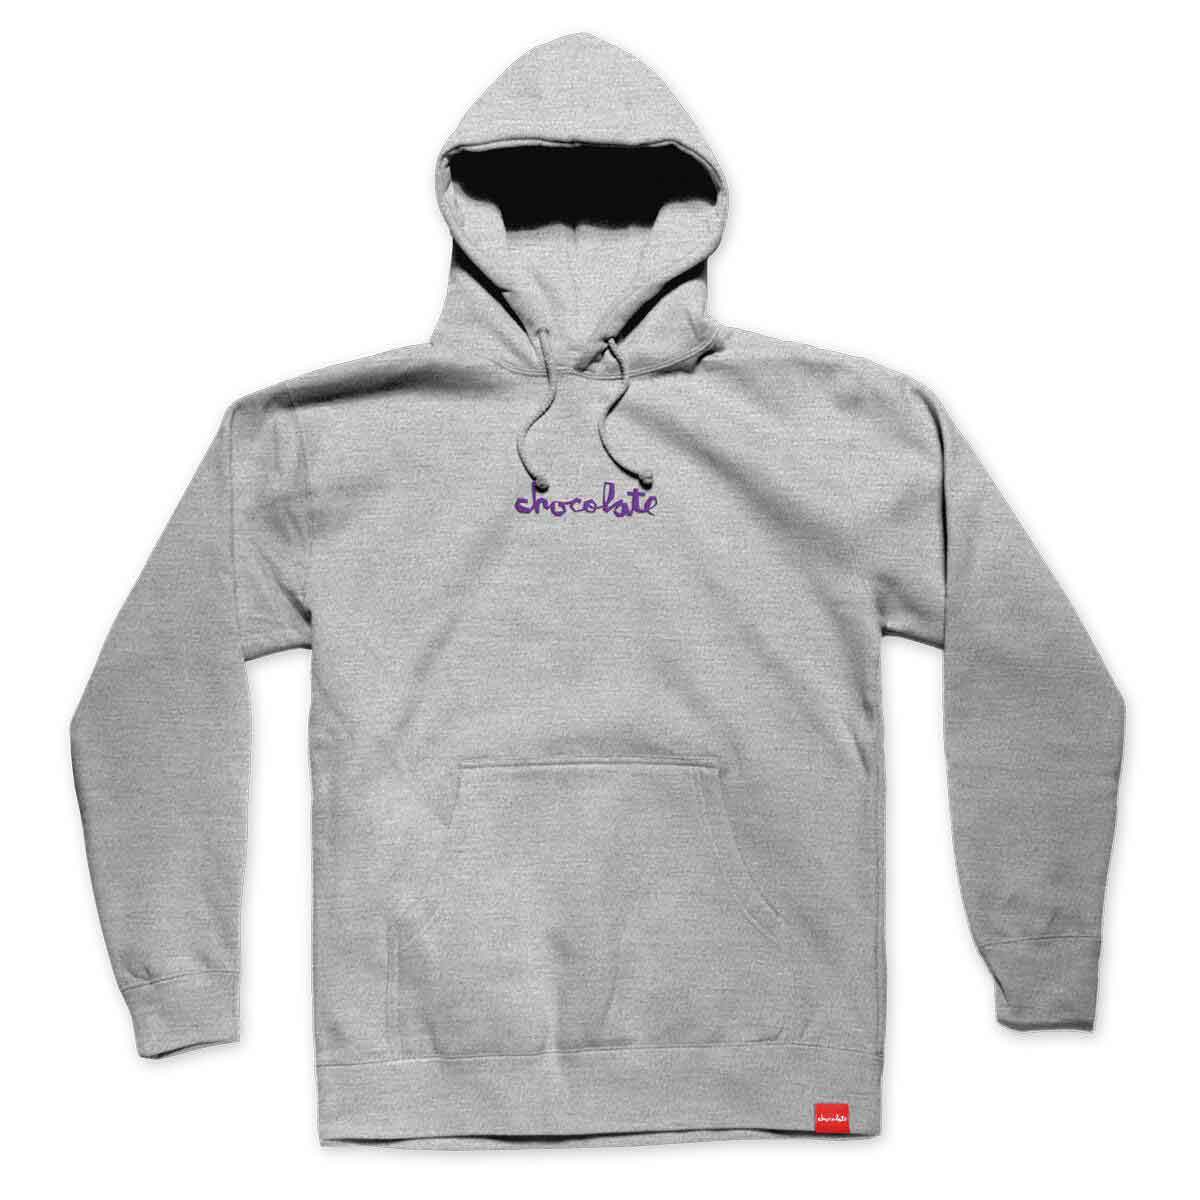 Chocolate Mid Chunk Youth Pullover Hoodie - Grey Heather